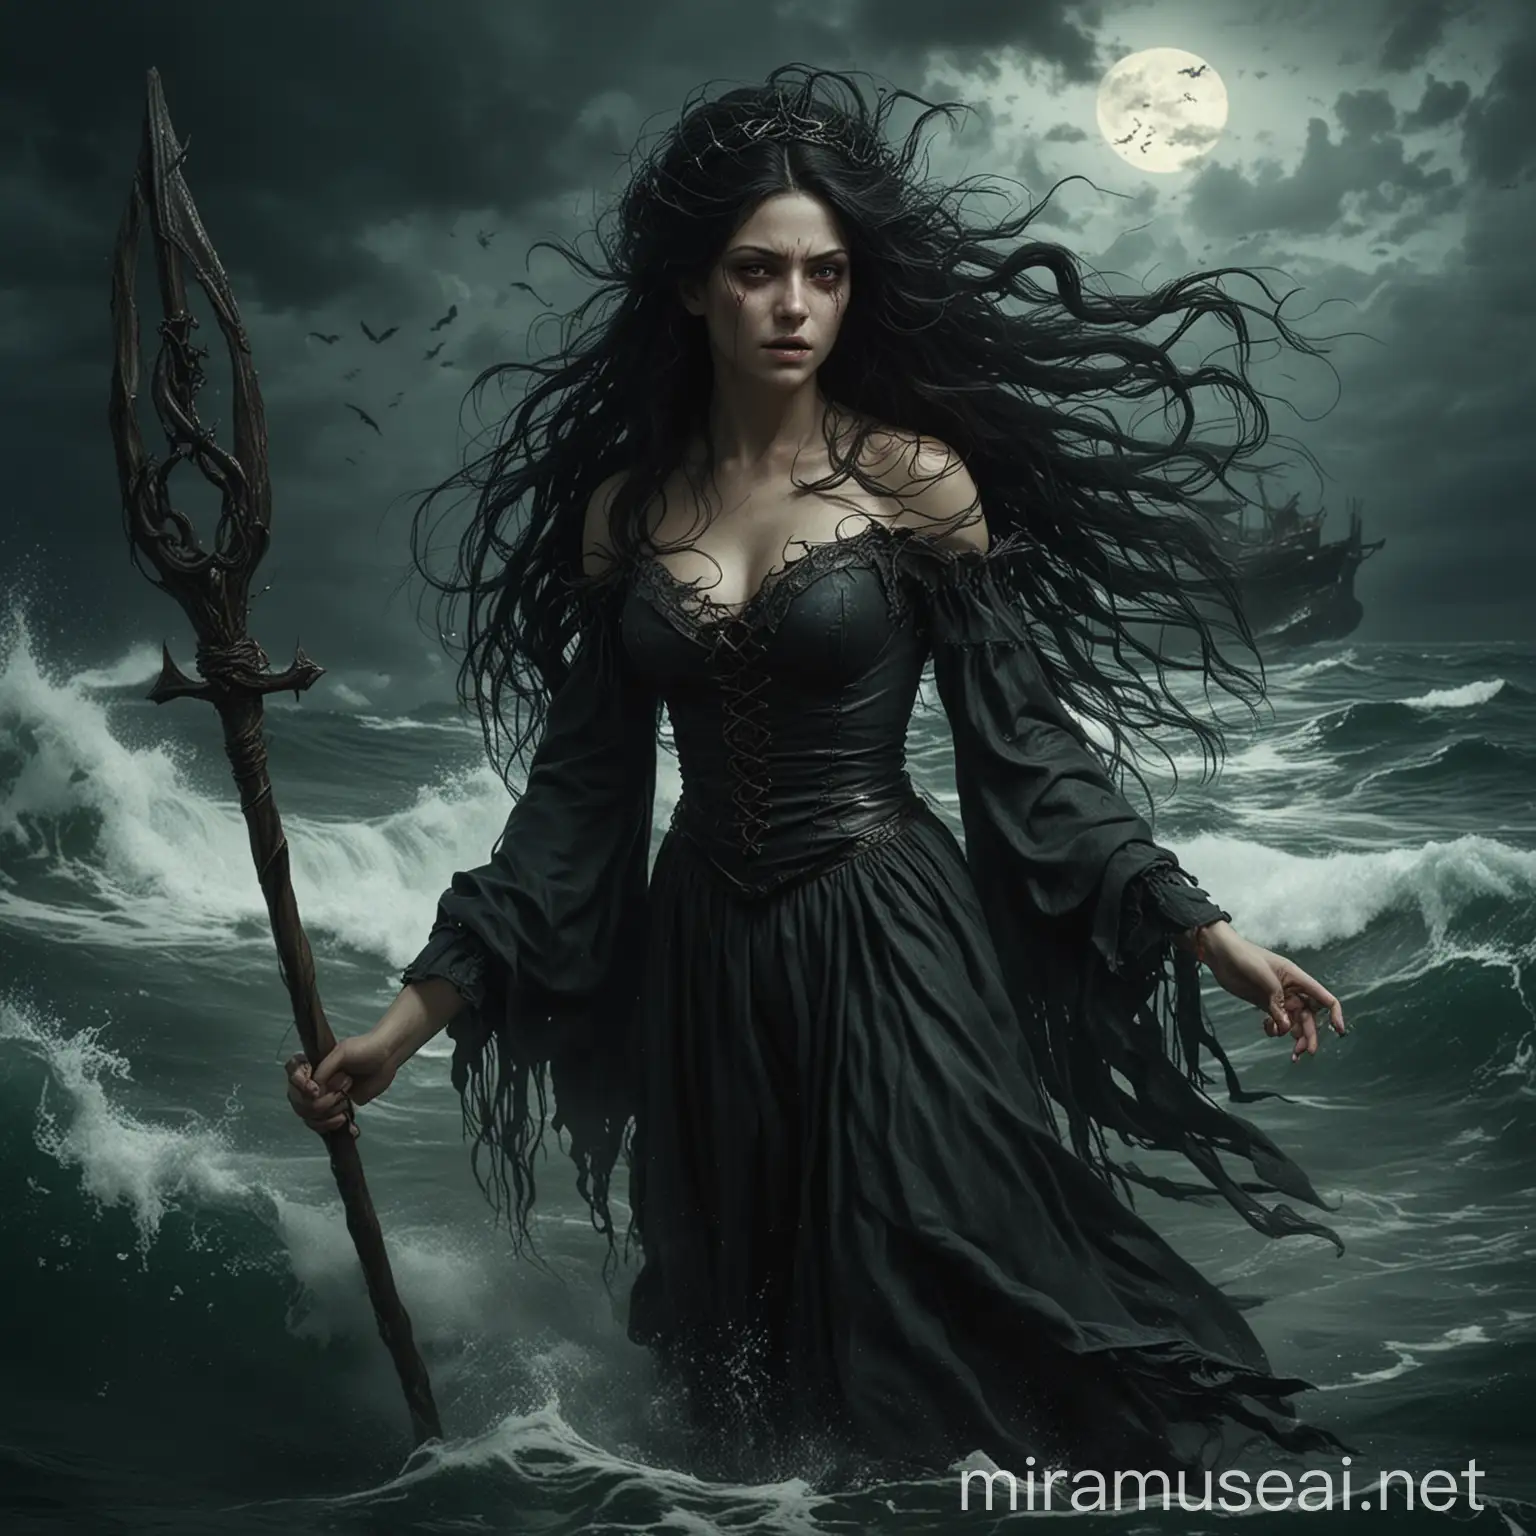 The witch of the sea. She is evil